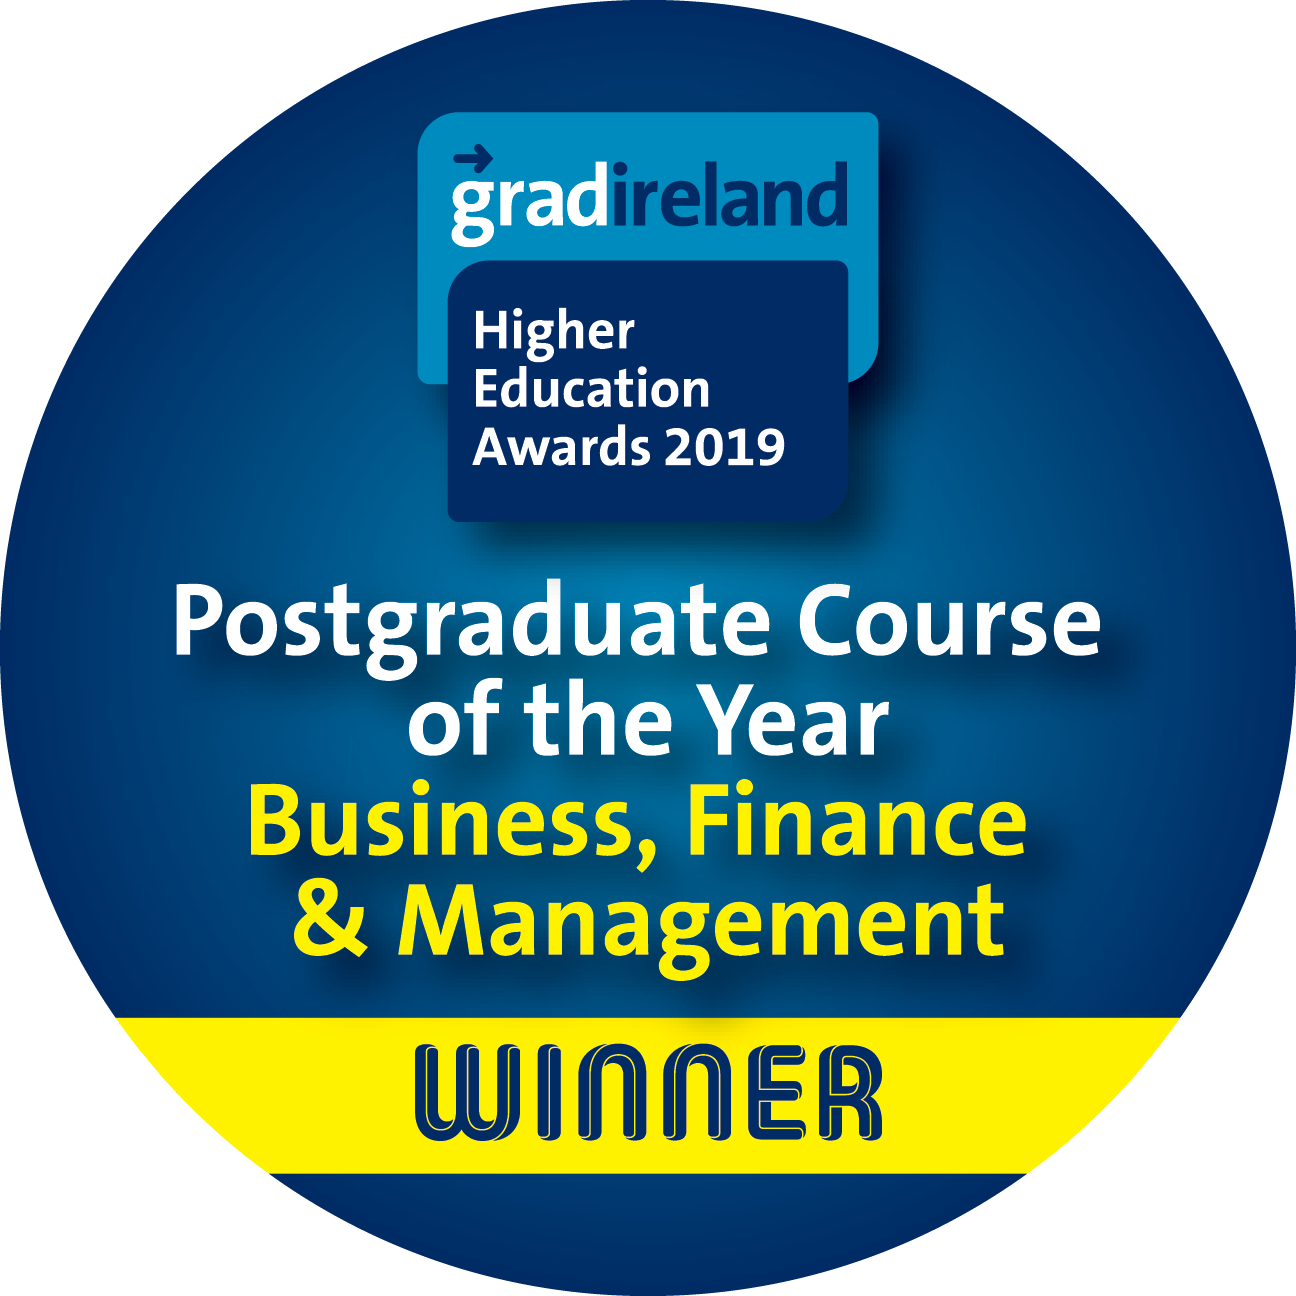 Postgraduate course of the year